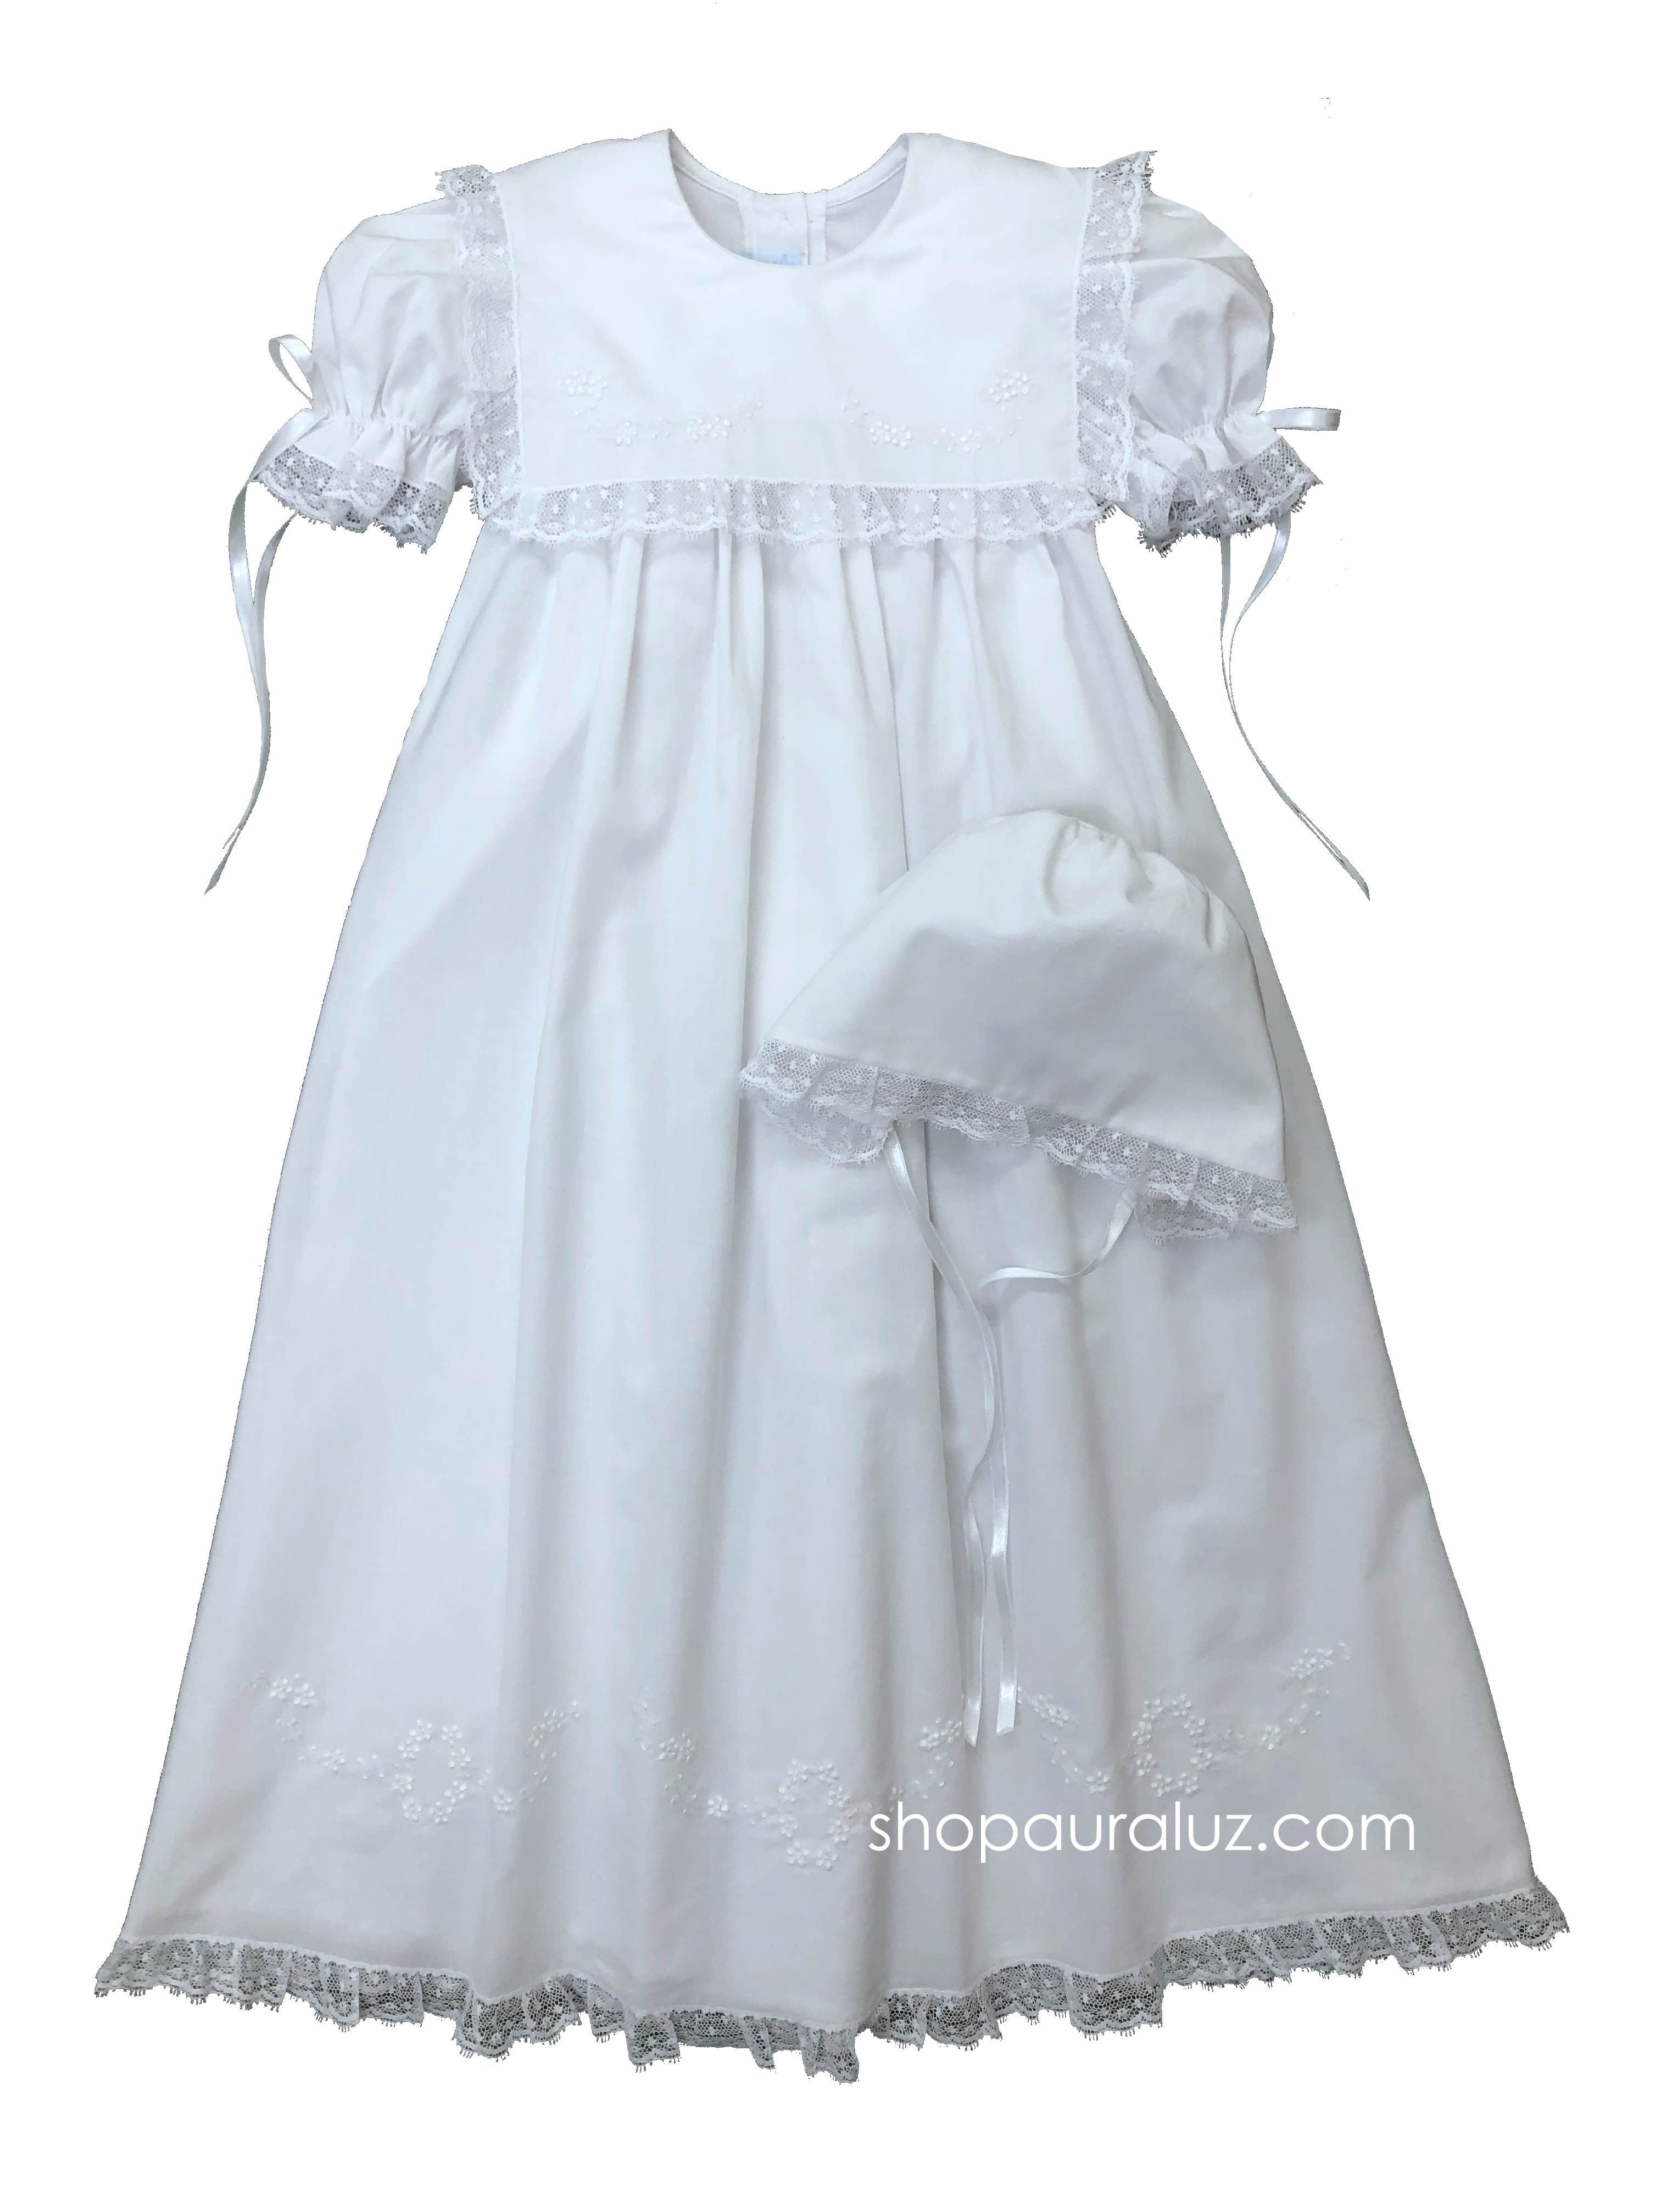 Auraluz Christening Gown/Slip/Hat...White with white lace/ribbon, square collar and embroidered flowers